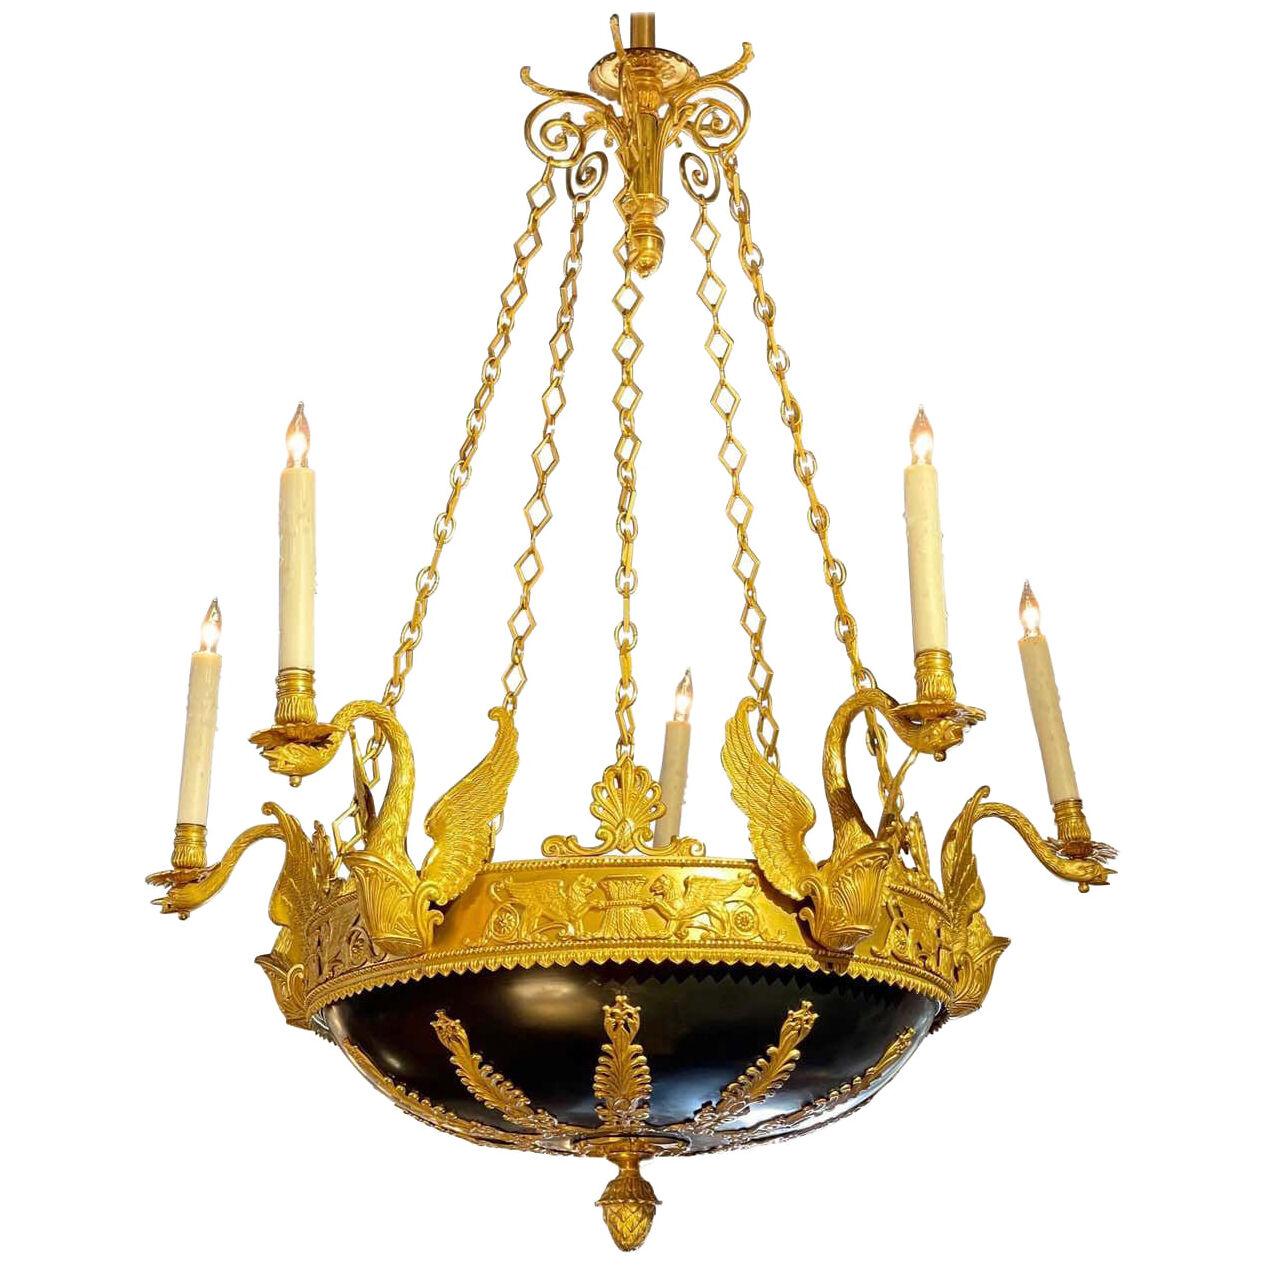 19th Century Russian Empire Style Chandelier with Gilt Bronze and 5 Arms